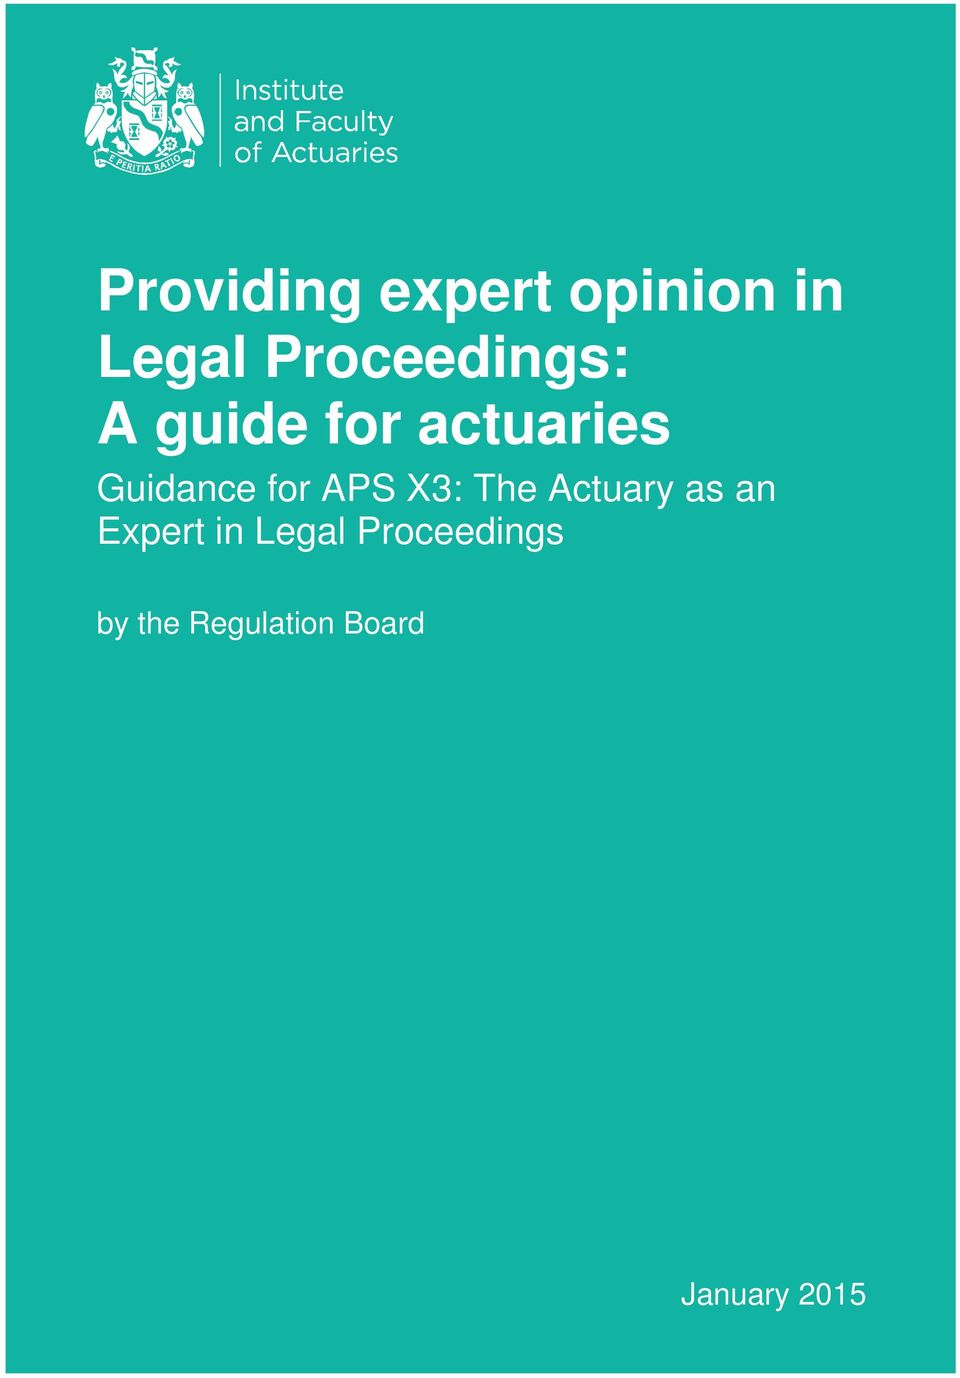 Guidance for APS X3: The Actuary as an